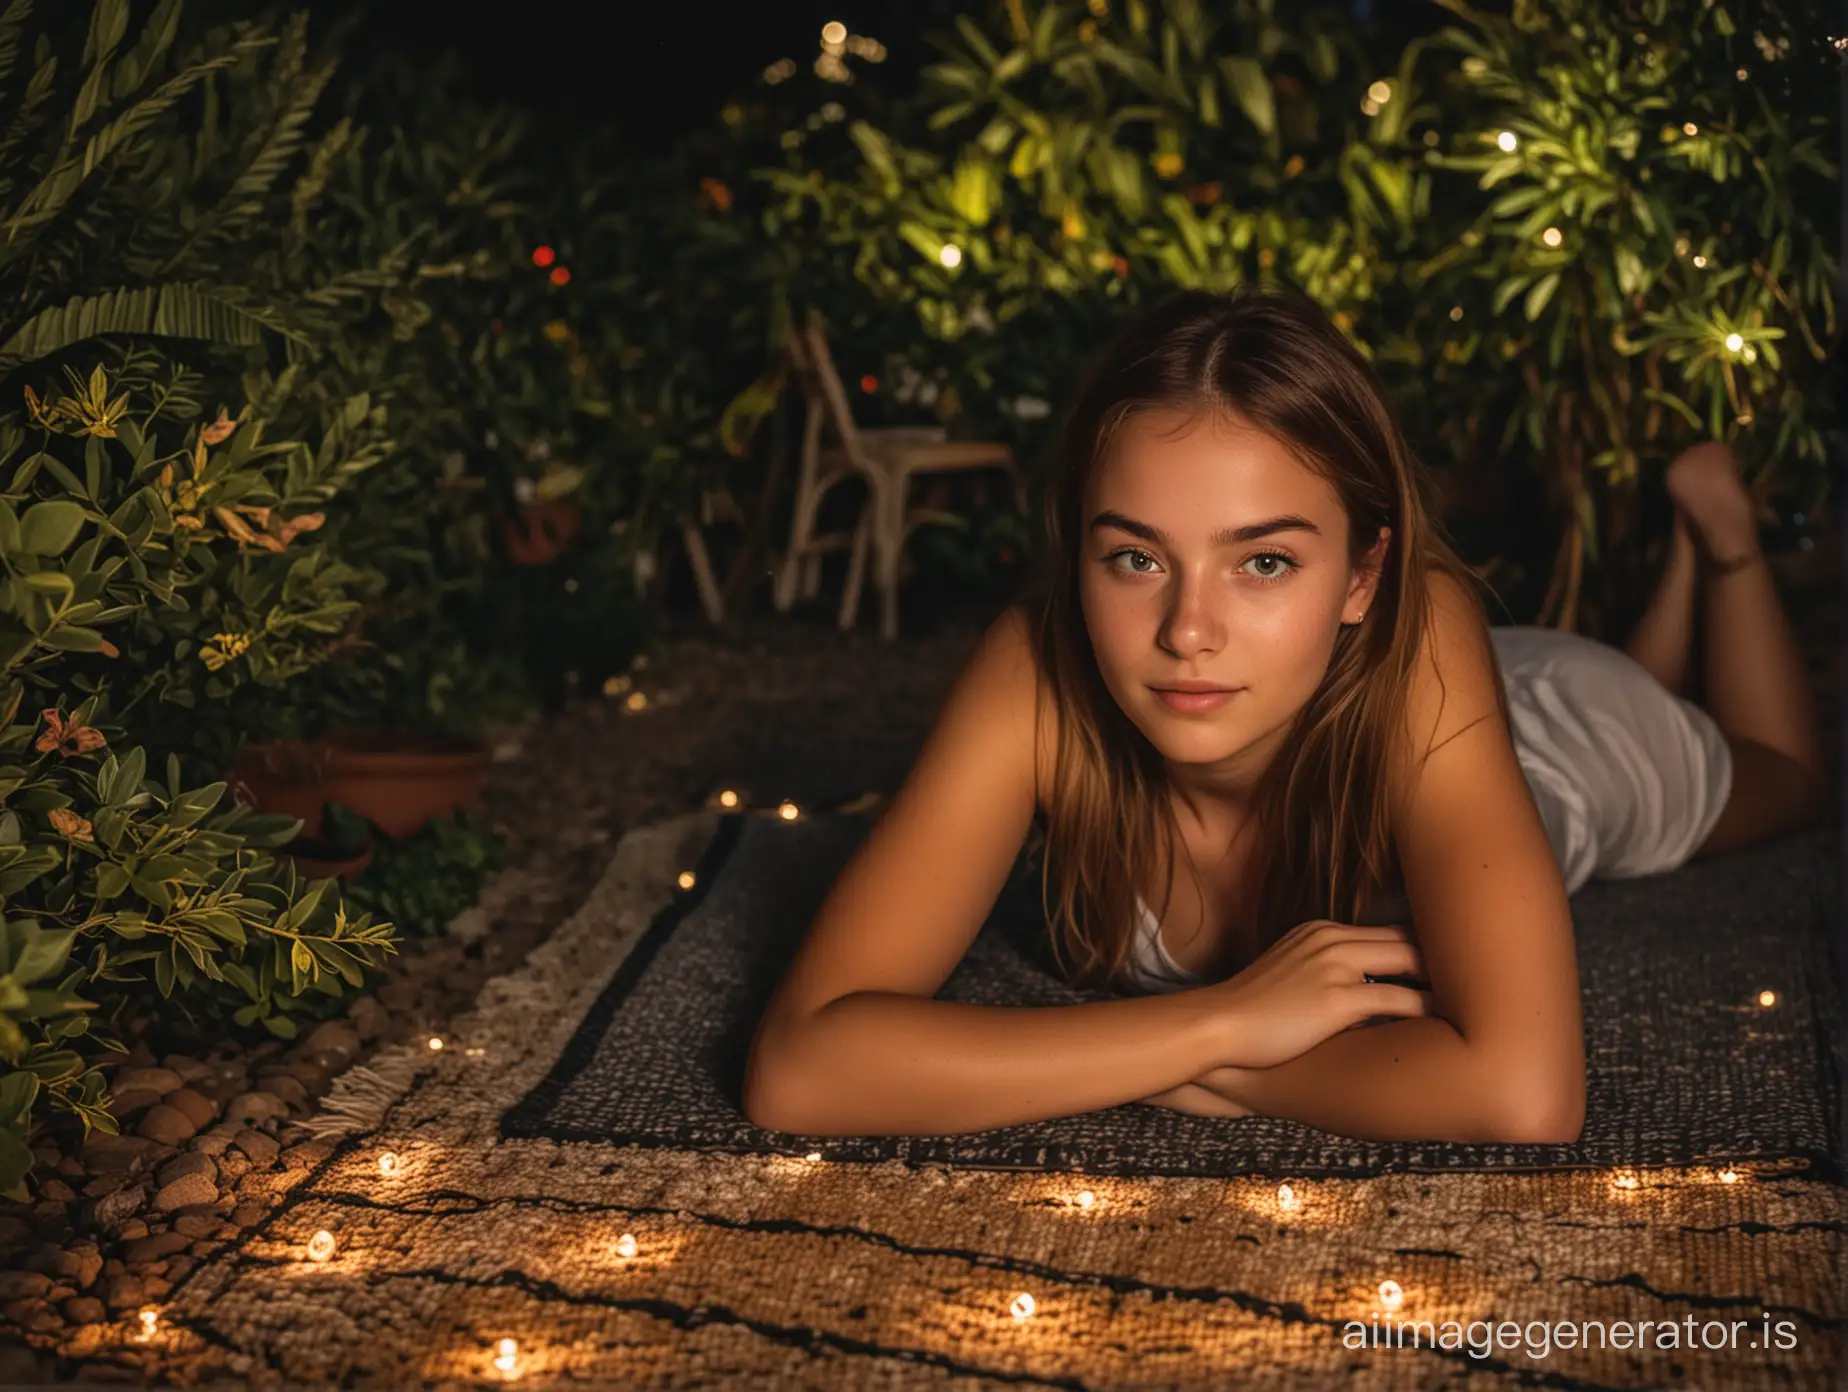 Gorgeous fifteen years old Auburn girl lying on a mat in a miraculous garden in Tenerife midnight small light spots everywhere 